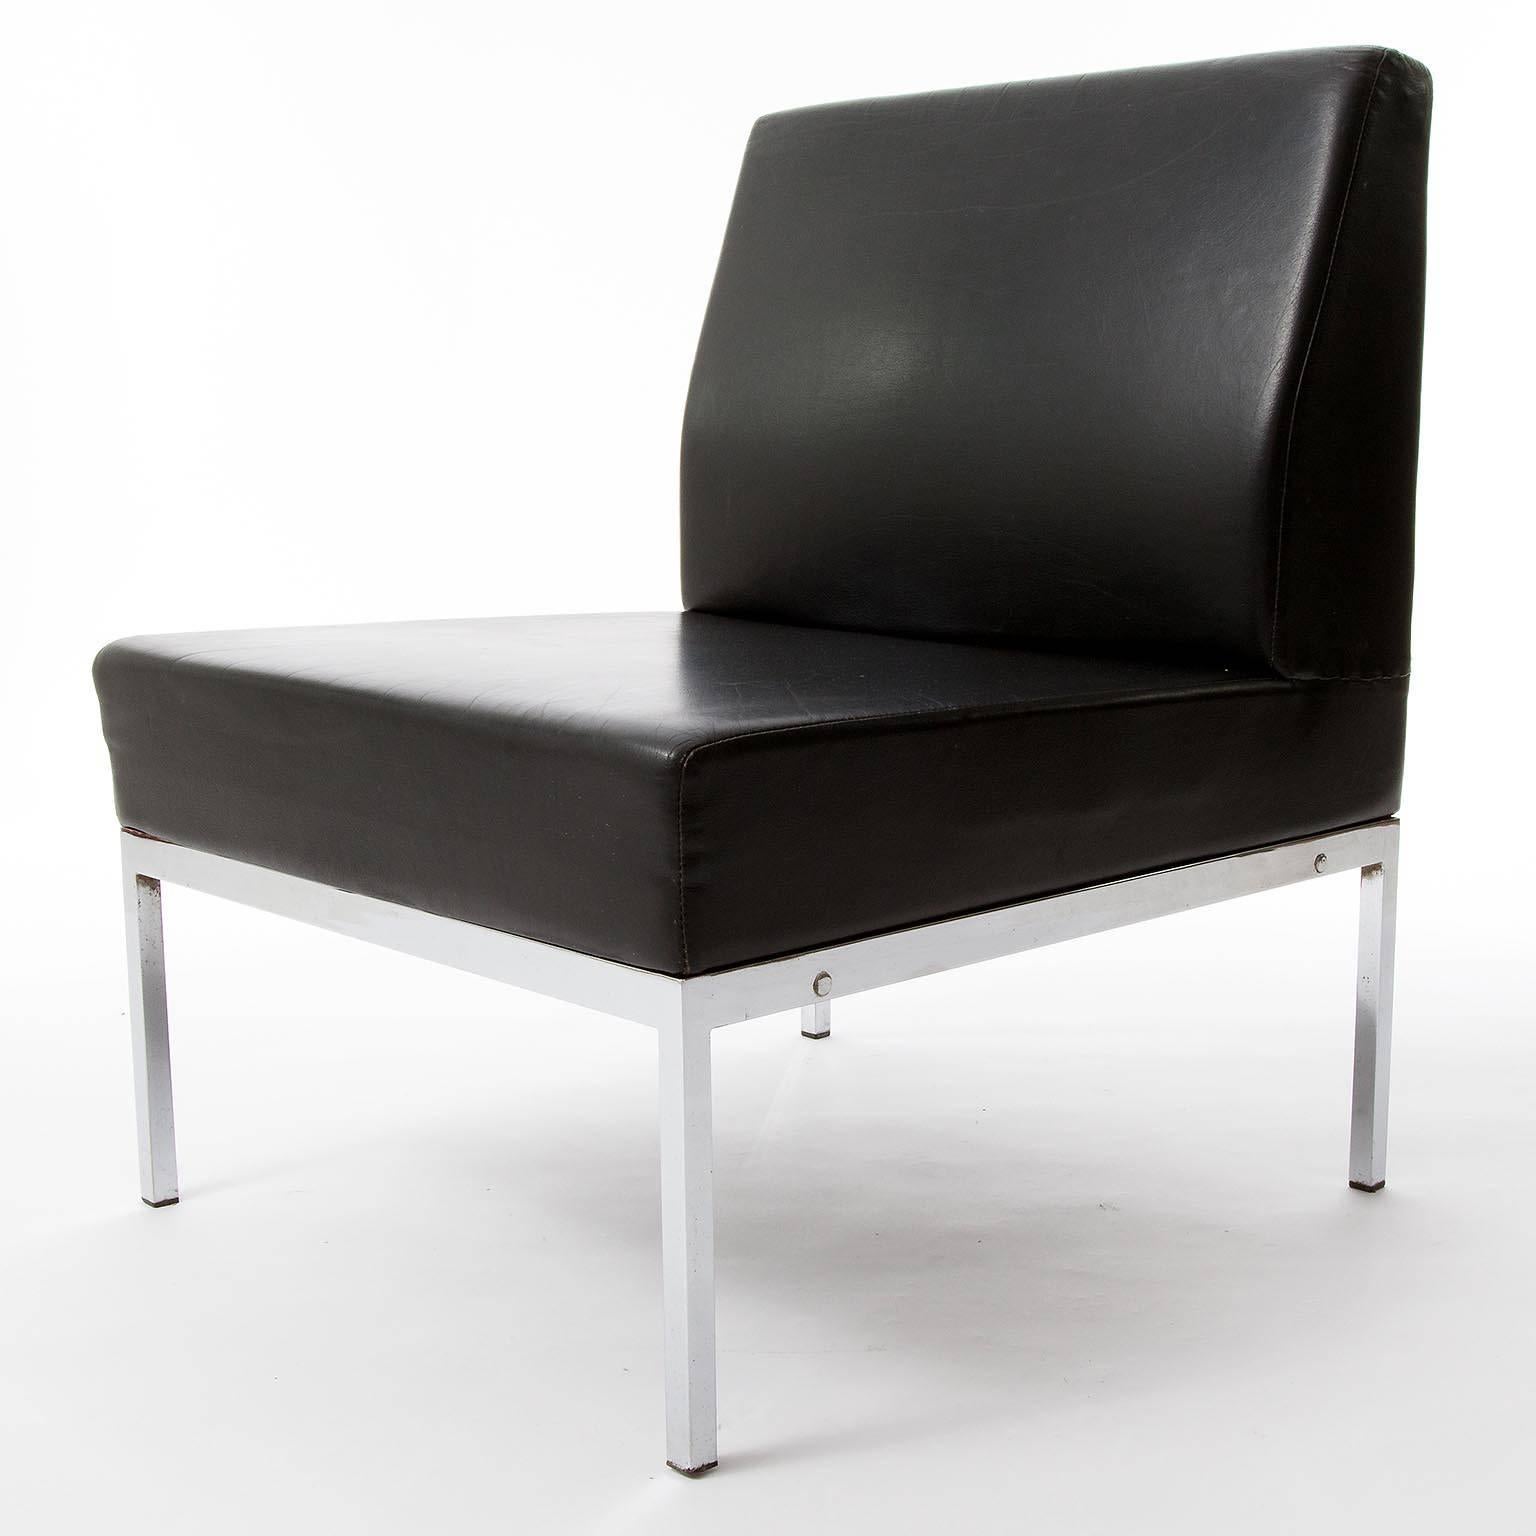 A set of two leather and chrome or nickel lounge chairs attributed to Thonet, Austria, circa 1970 (late 1960s or early 1970s).
They are made of a high quality and thick black leather on a chromed (or nickeled) metal frame.
The chairs can be mounted